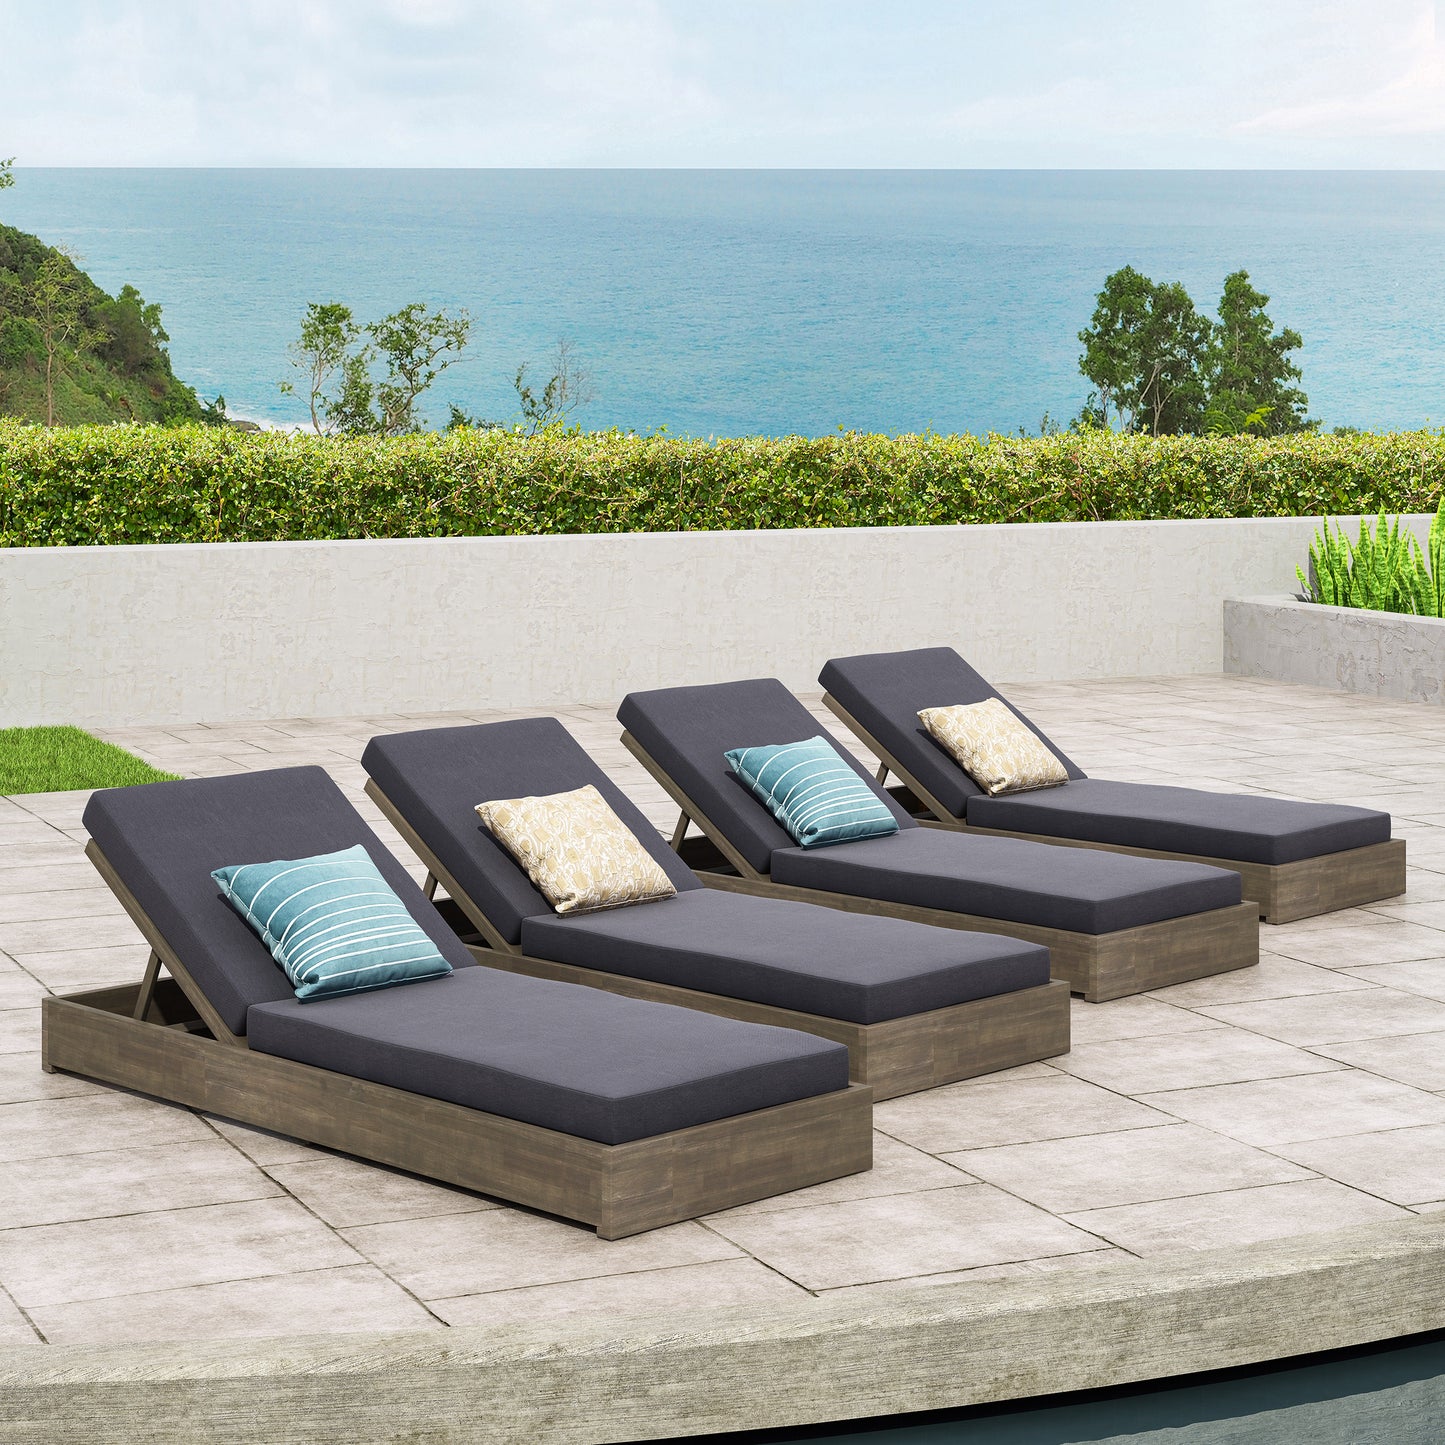 Niyanna Outdoor Acacia Wood Chaise Lounge with Cushion (Set of 4)